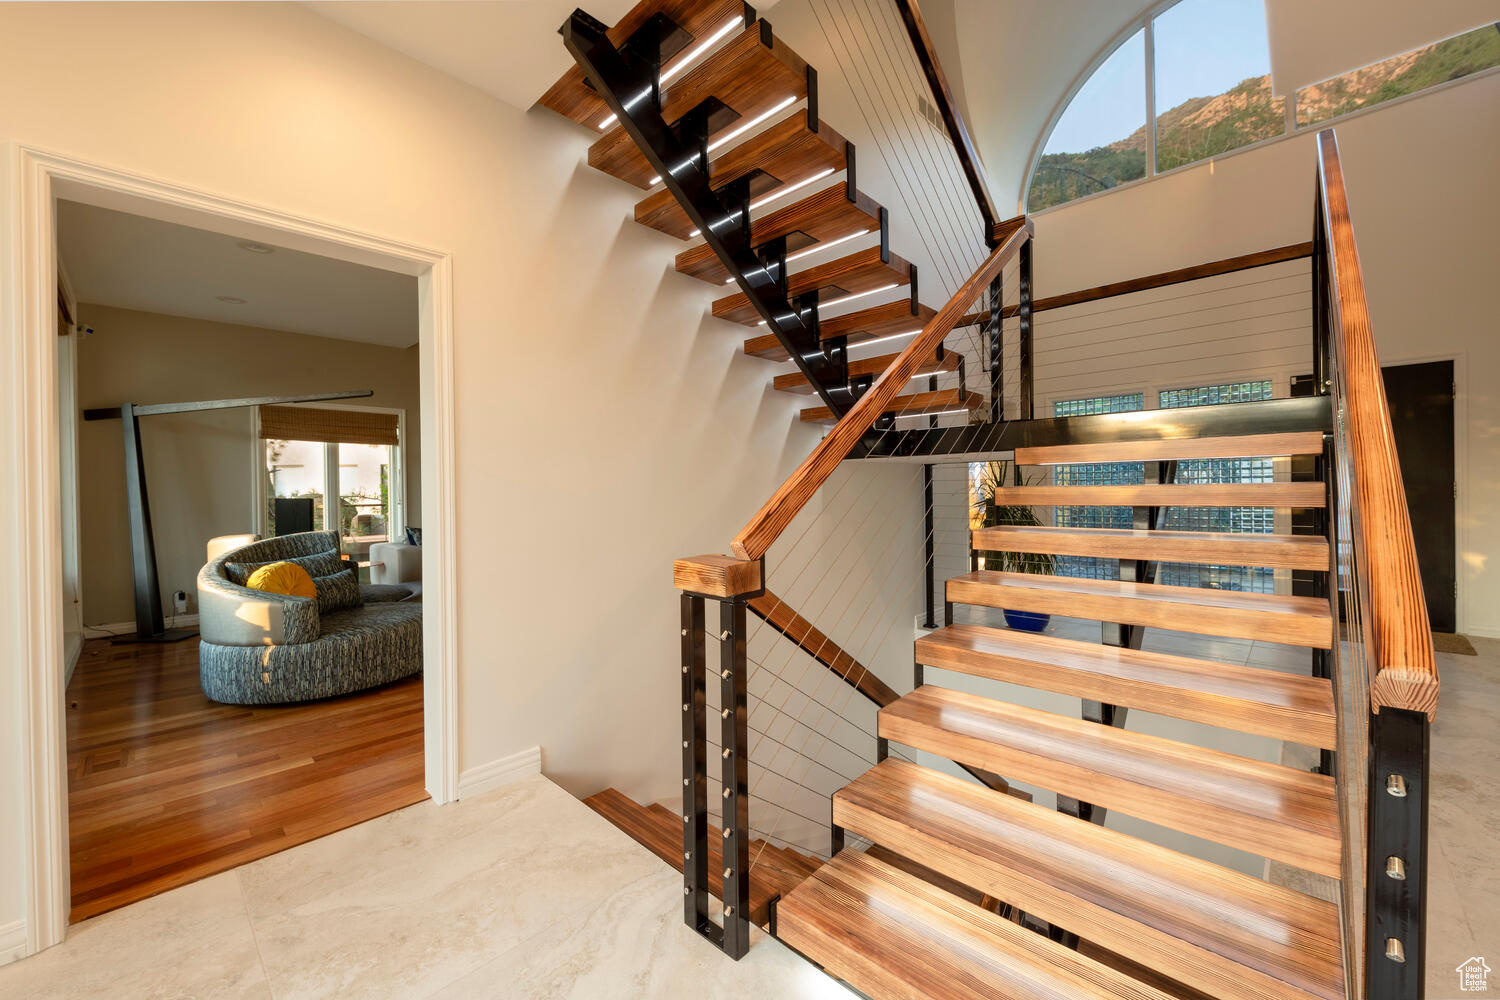 Stairway to the downstairs level featuring wood flooring